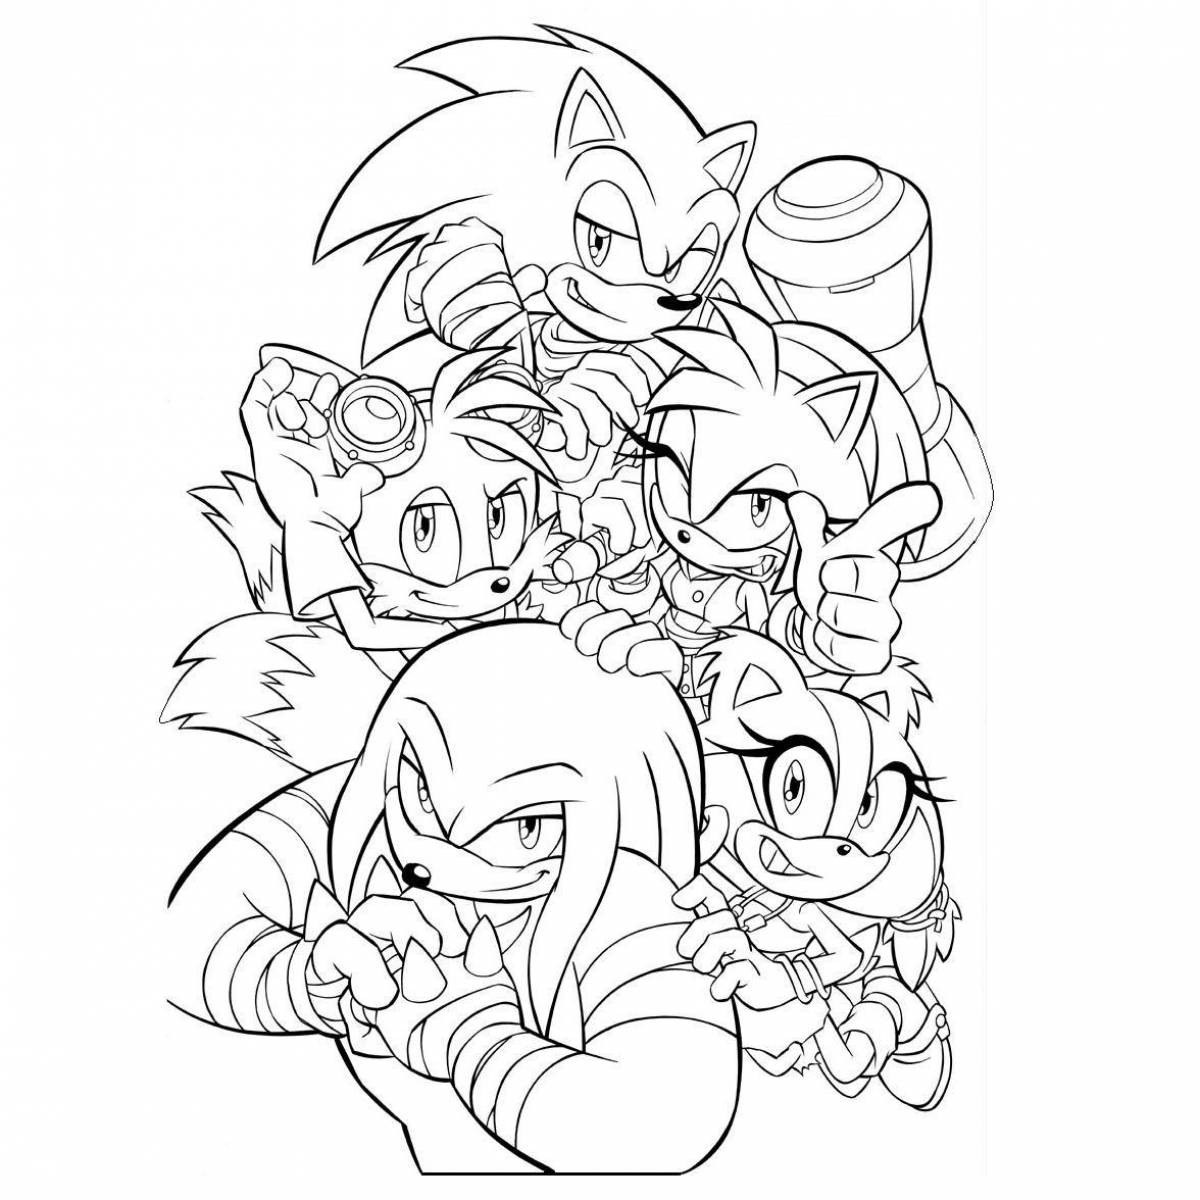 Sonic whole team awesome coloring book